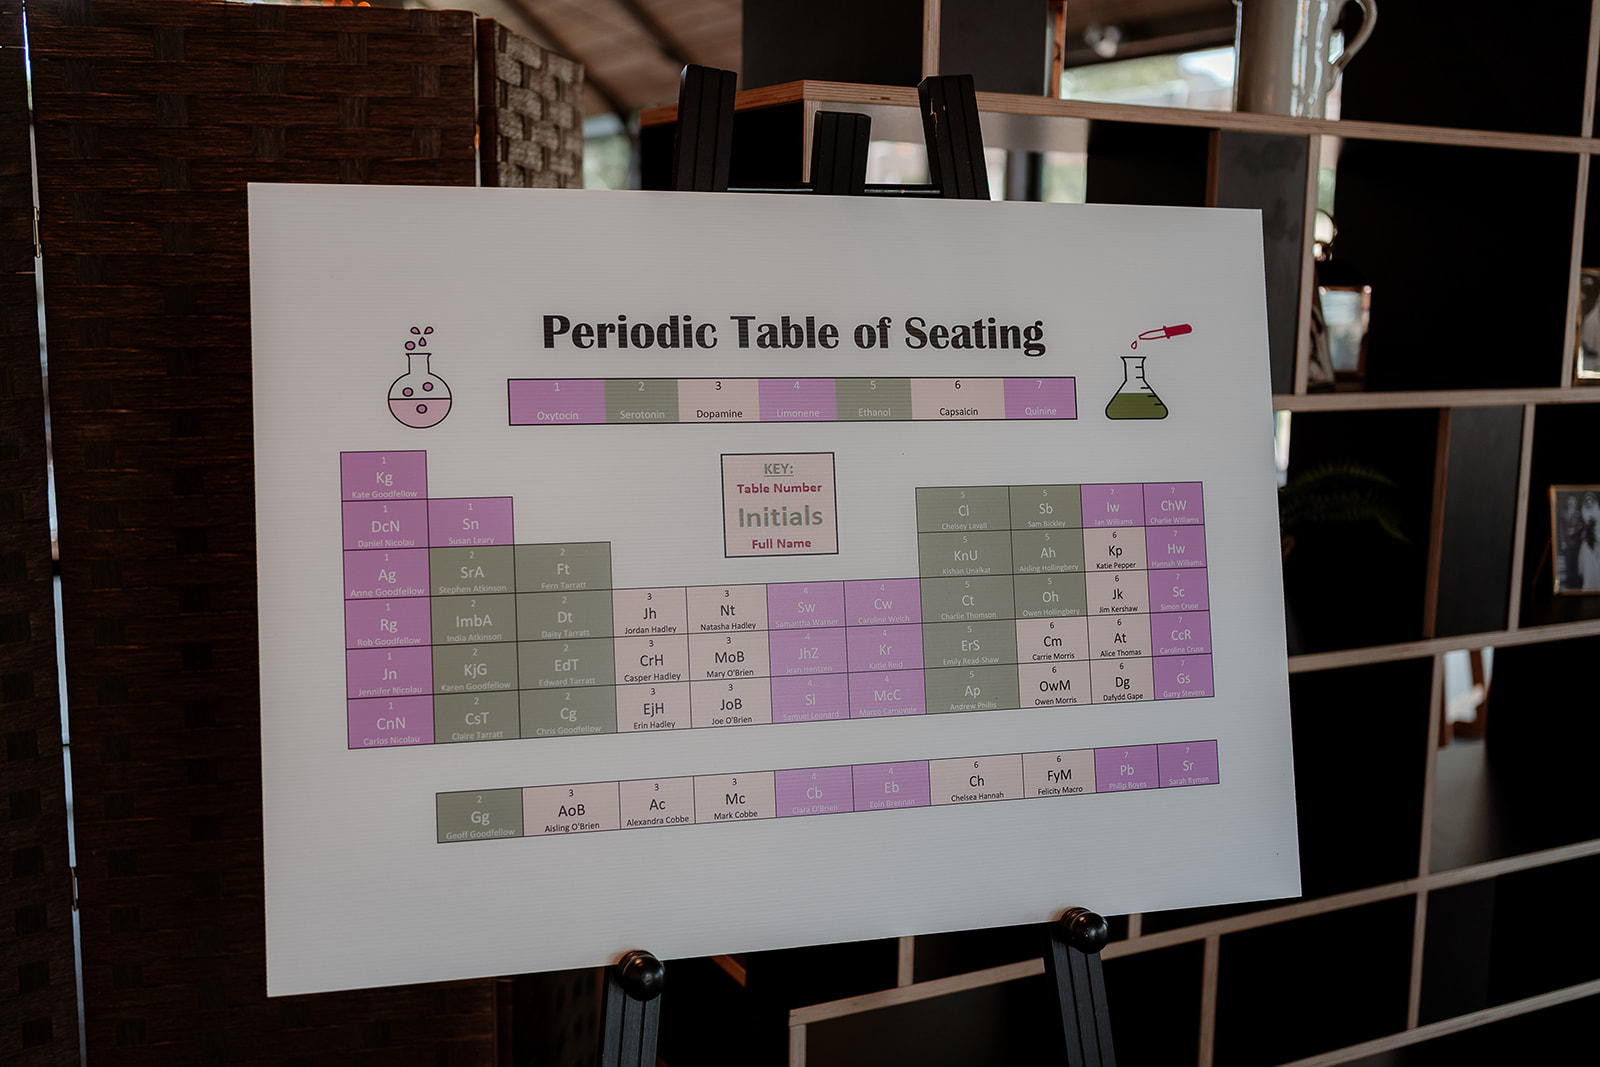 Periodic table seating plan for this summer Syrencot wedding